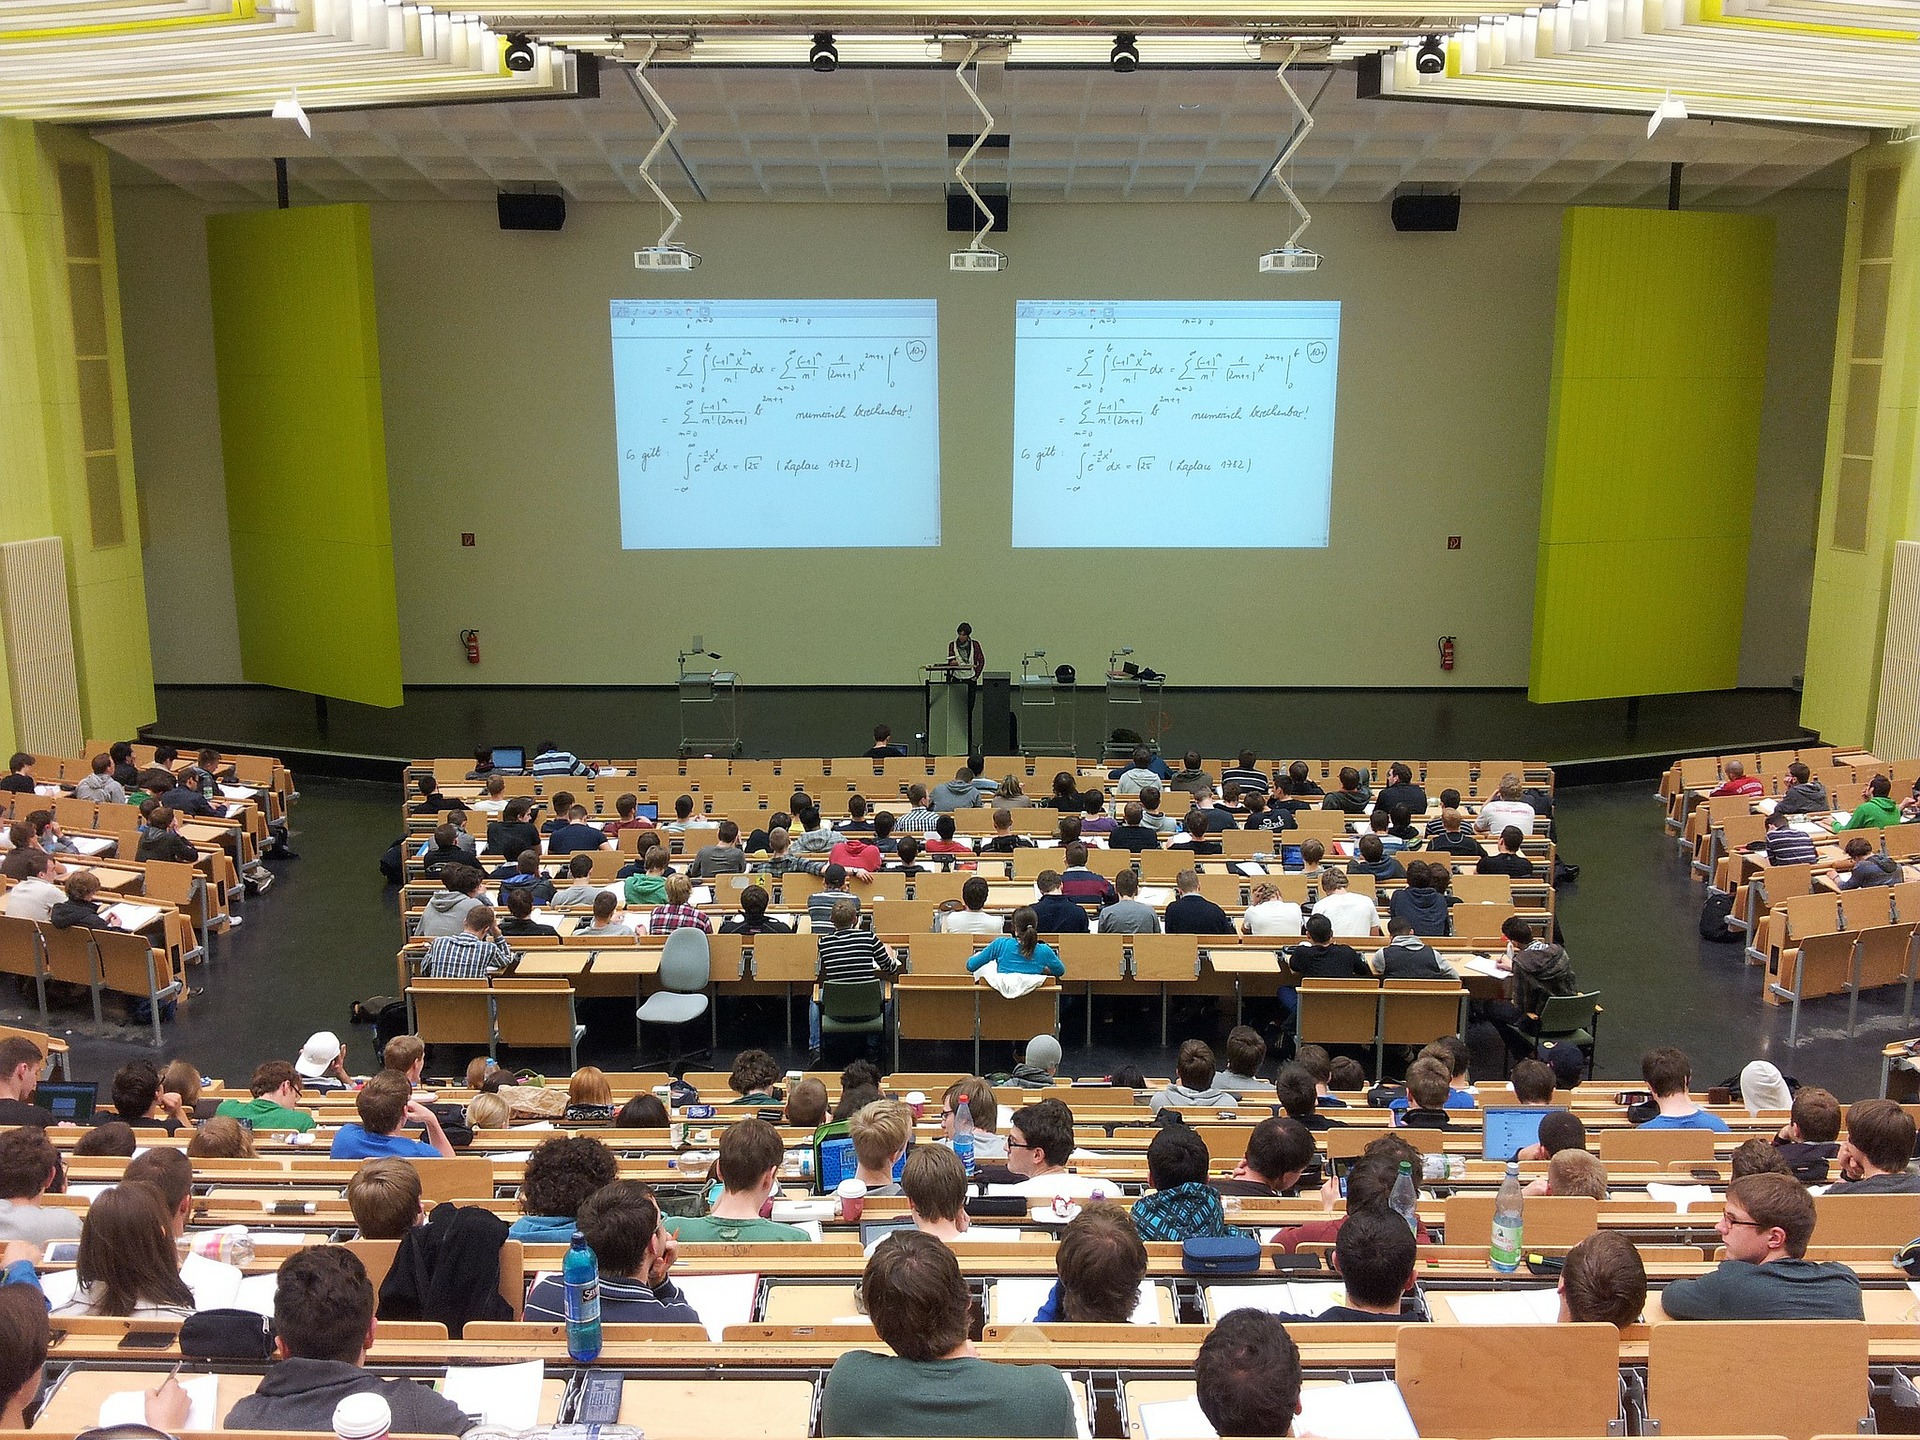 A lecture room at a university